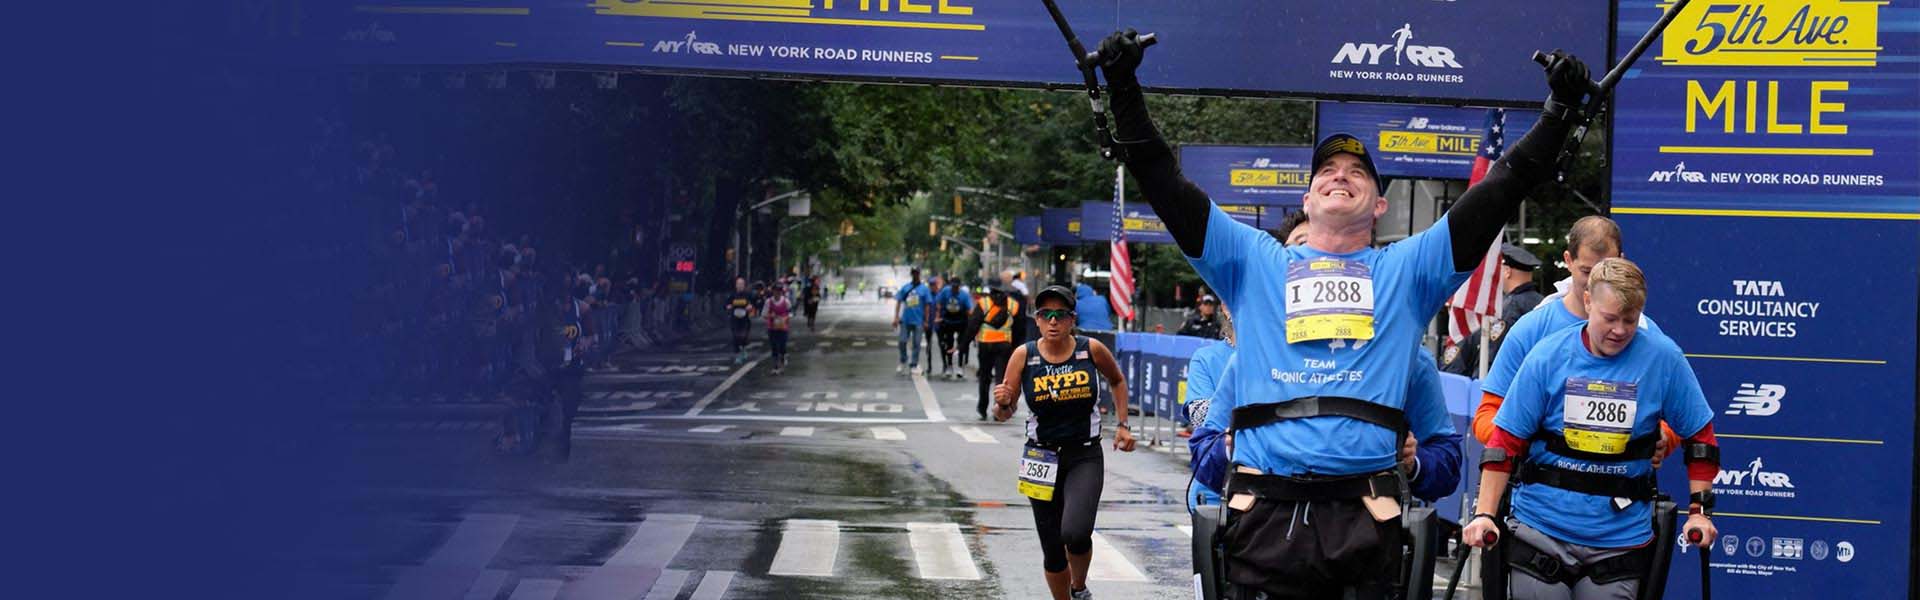 Image of runners at finish line